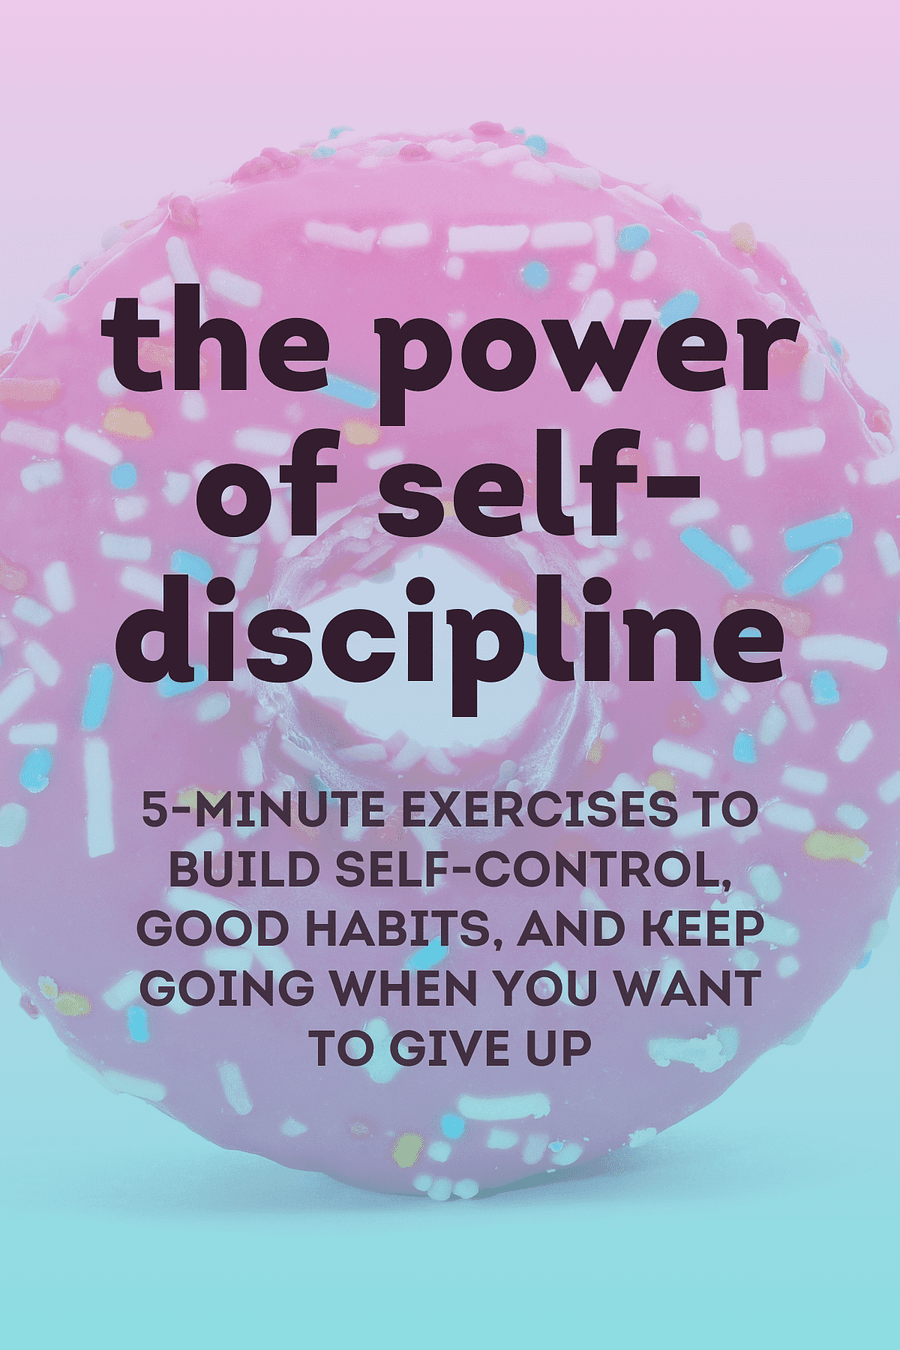 The Power of Self-Discipline by Peter Hollins - Book Summary